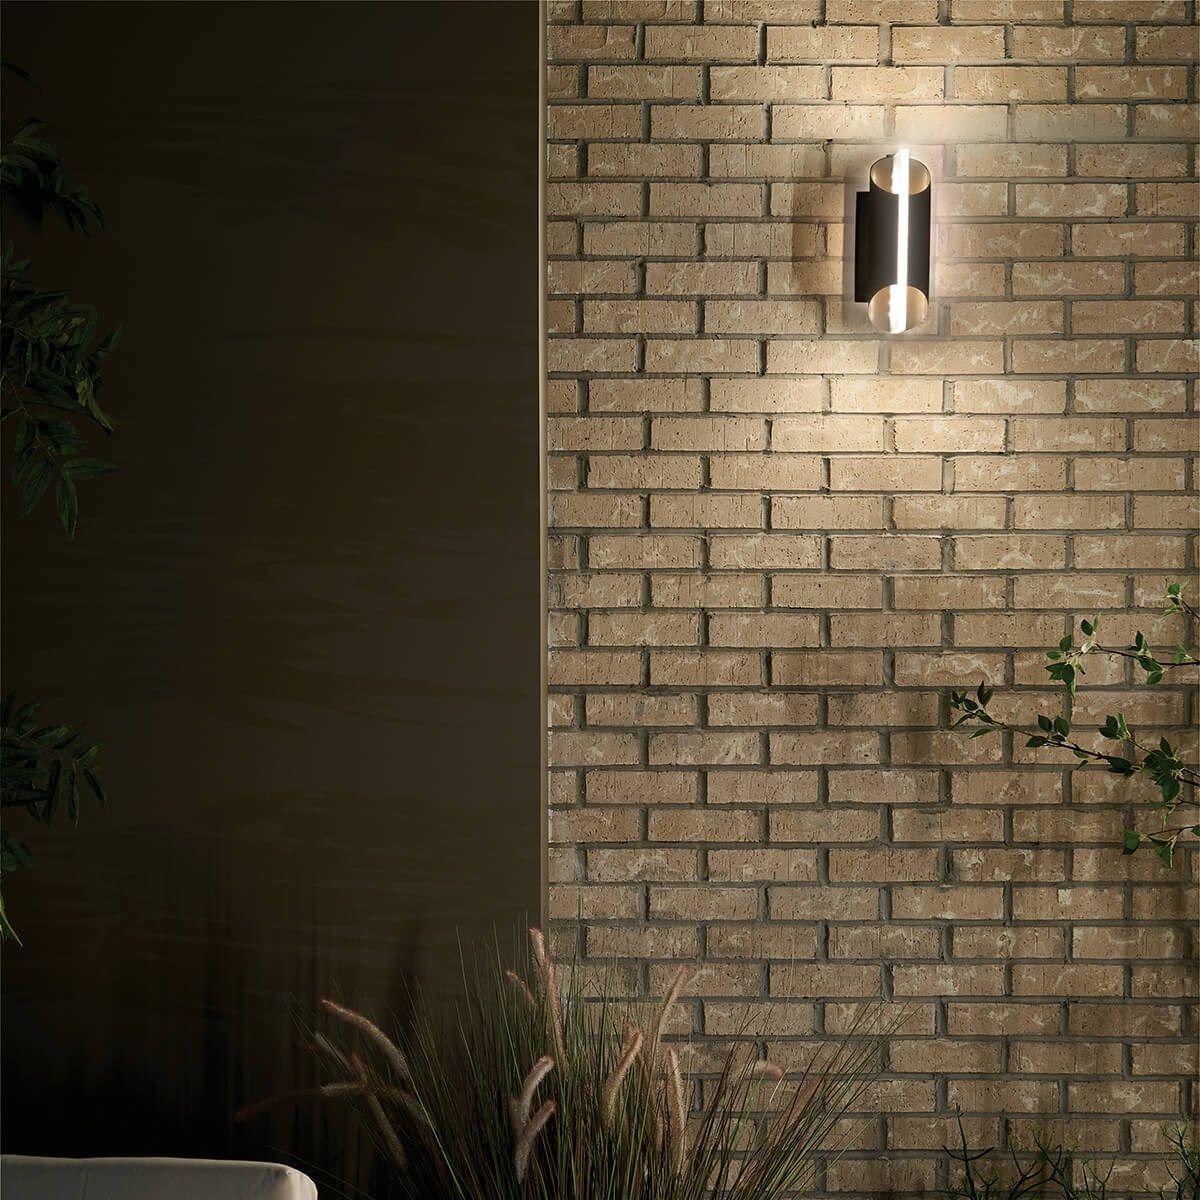 Astalis 12 in. LED Outdoor Wall Sconce 3000K Textured Black Finish